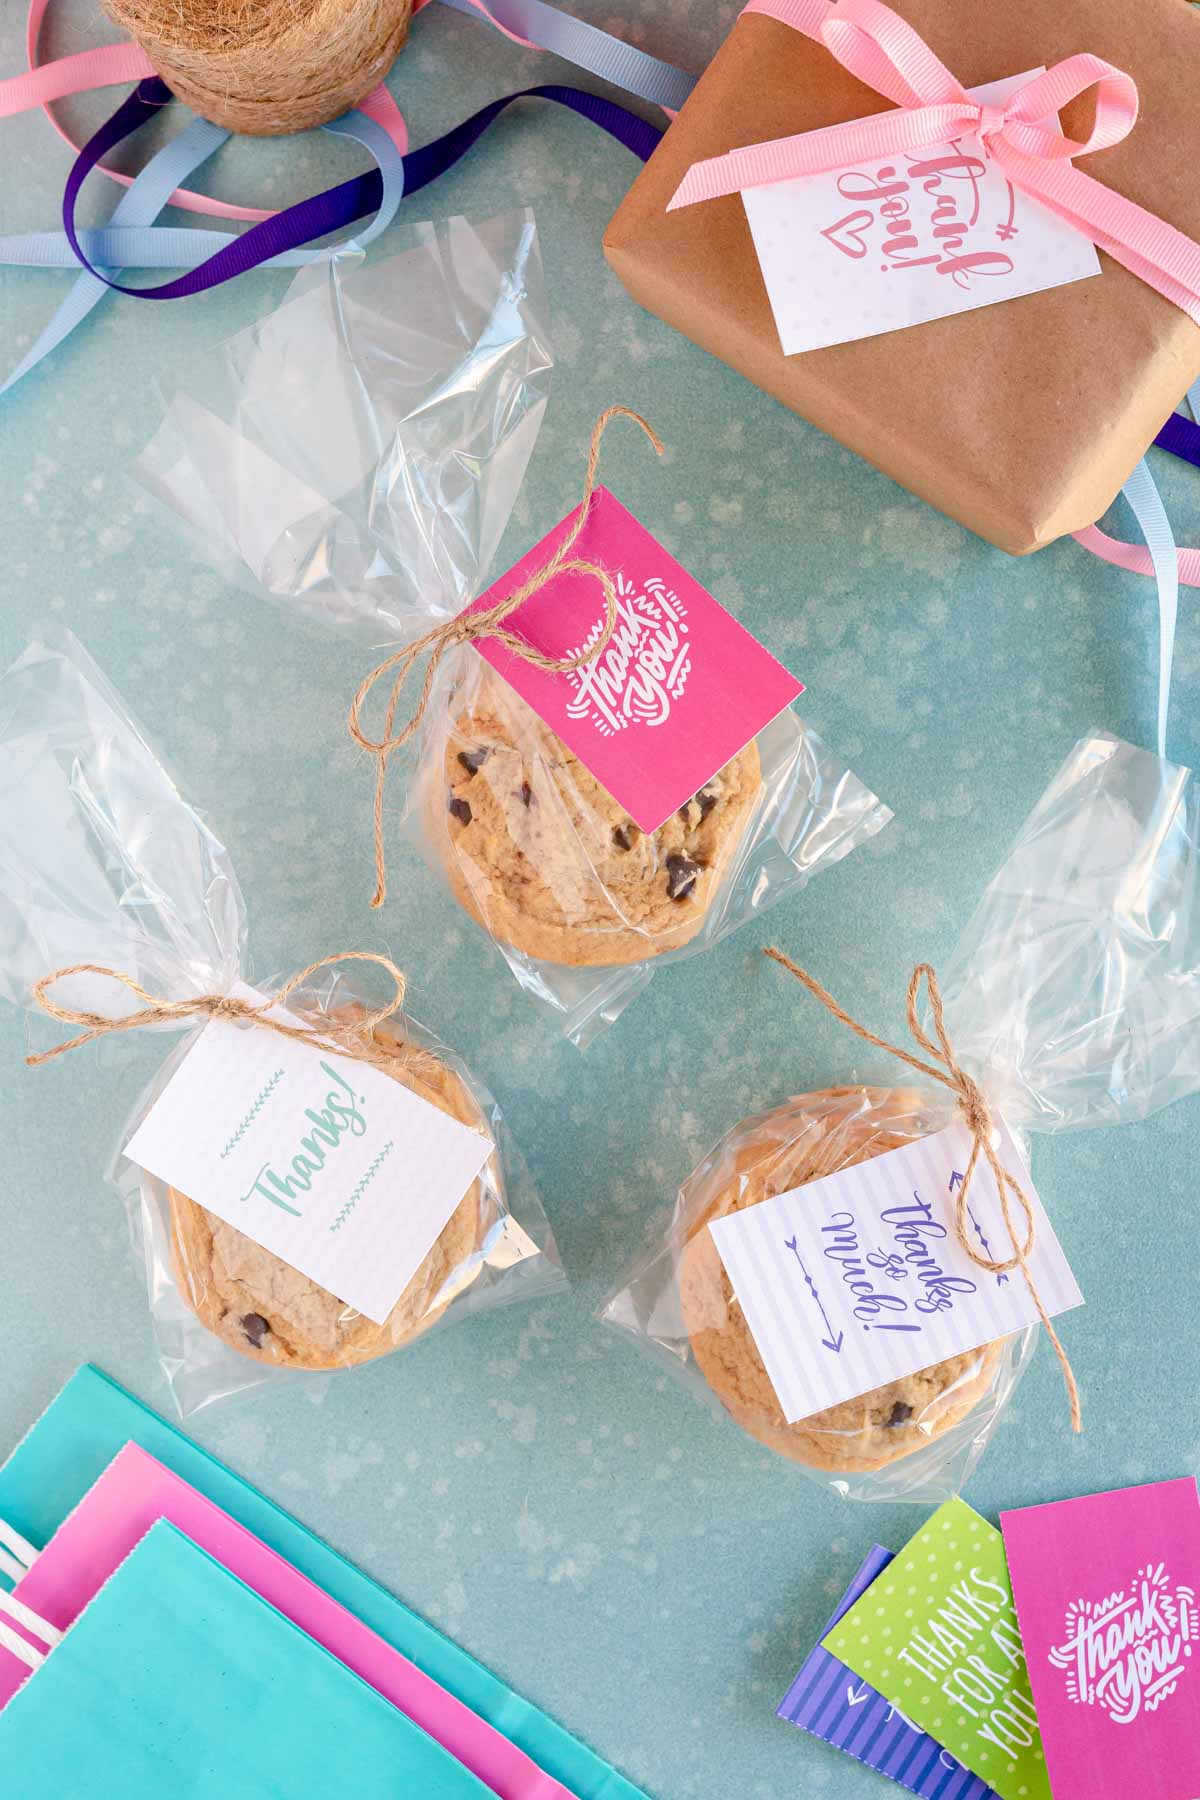 bagged chocolate chip cookies with thank you tags